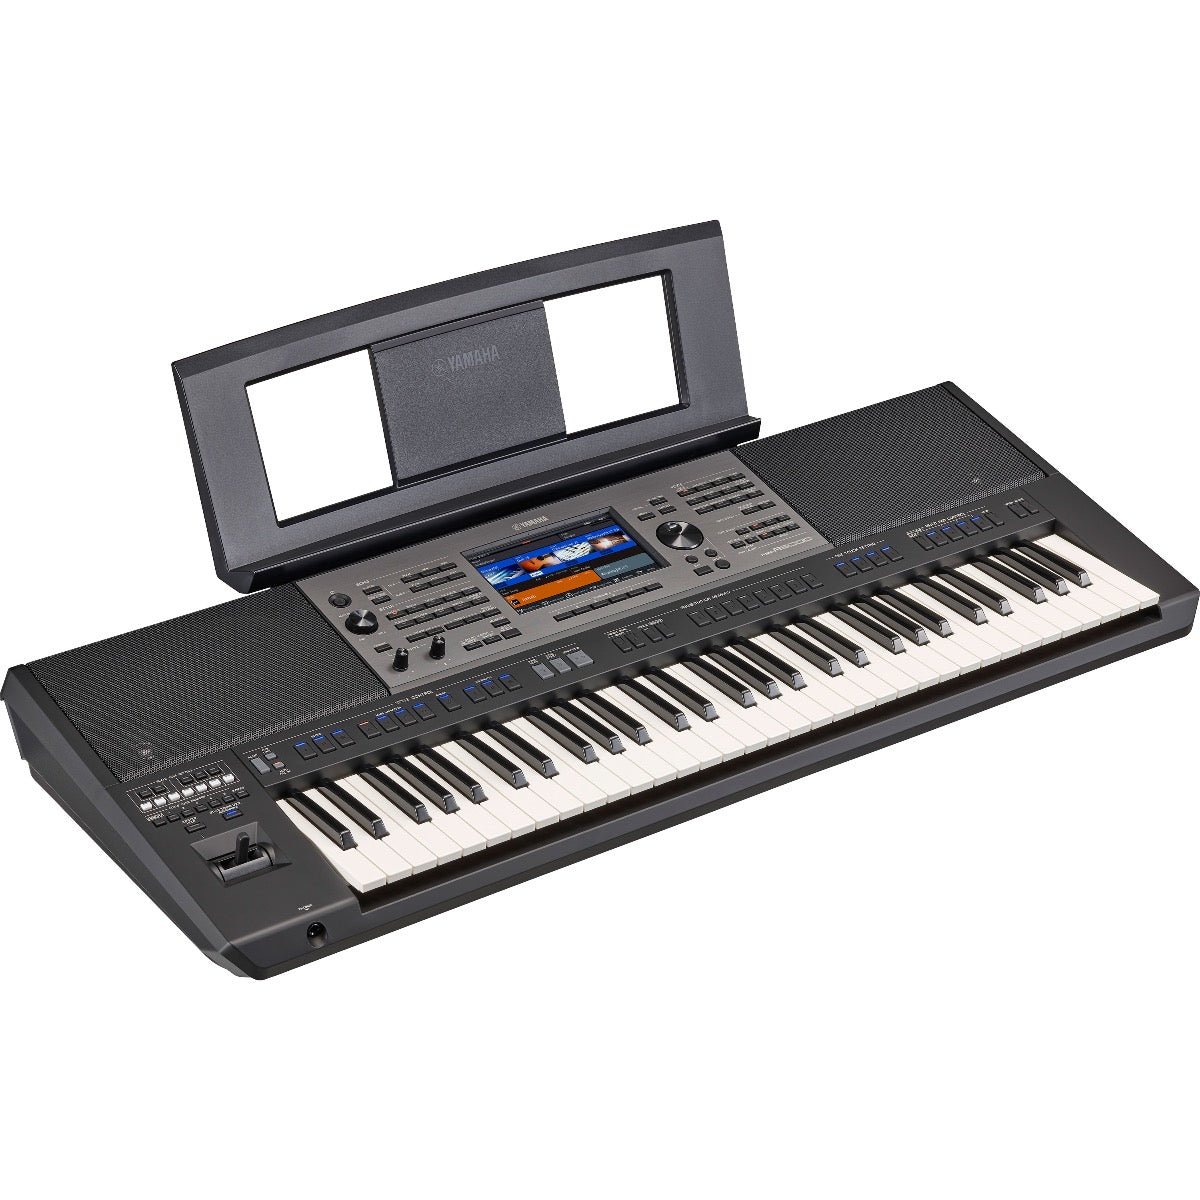 3/4 view of Yamaha PSR-A5000 Arranger Workstation Keyboard with music rest attached showing top, front and left side